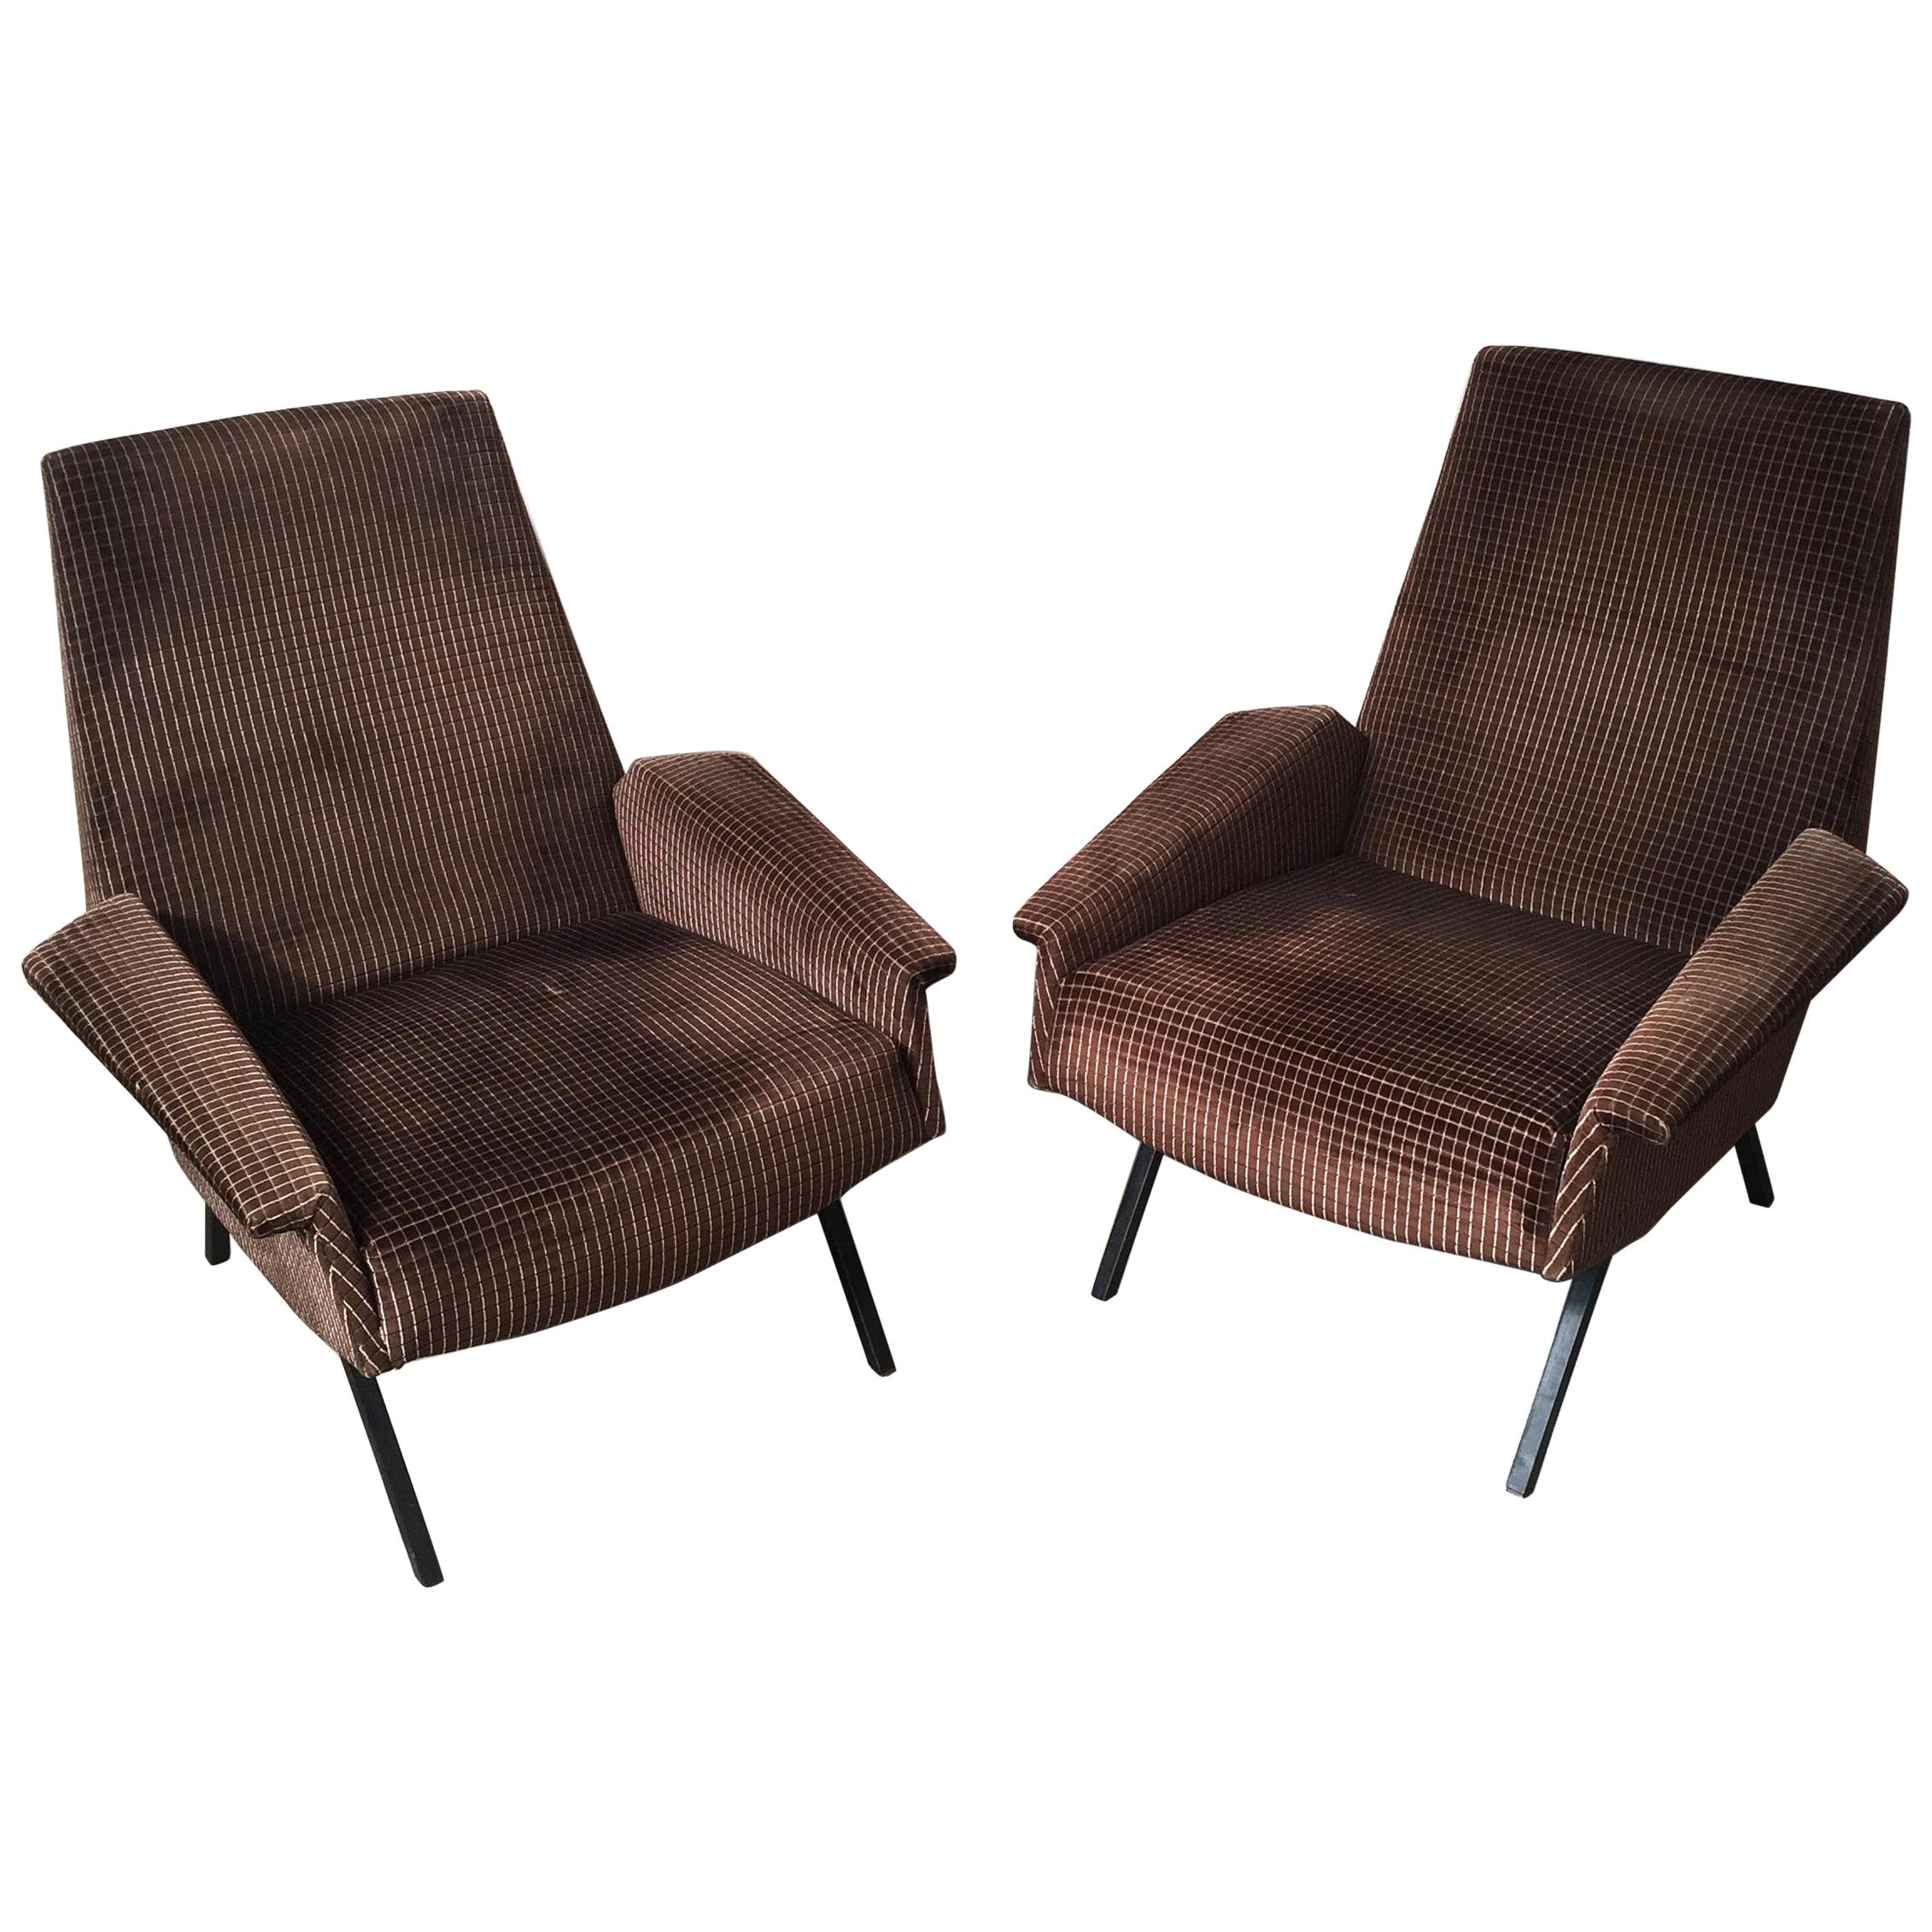 Italian Midcentury Armchair like "Lady Armchair" by Marco Zanuso in Brown, 1950s For Sale